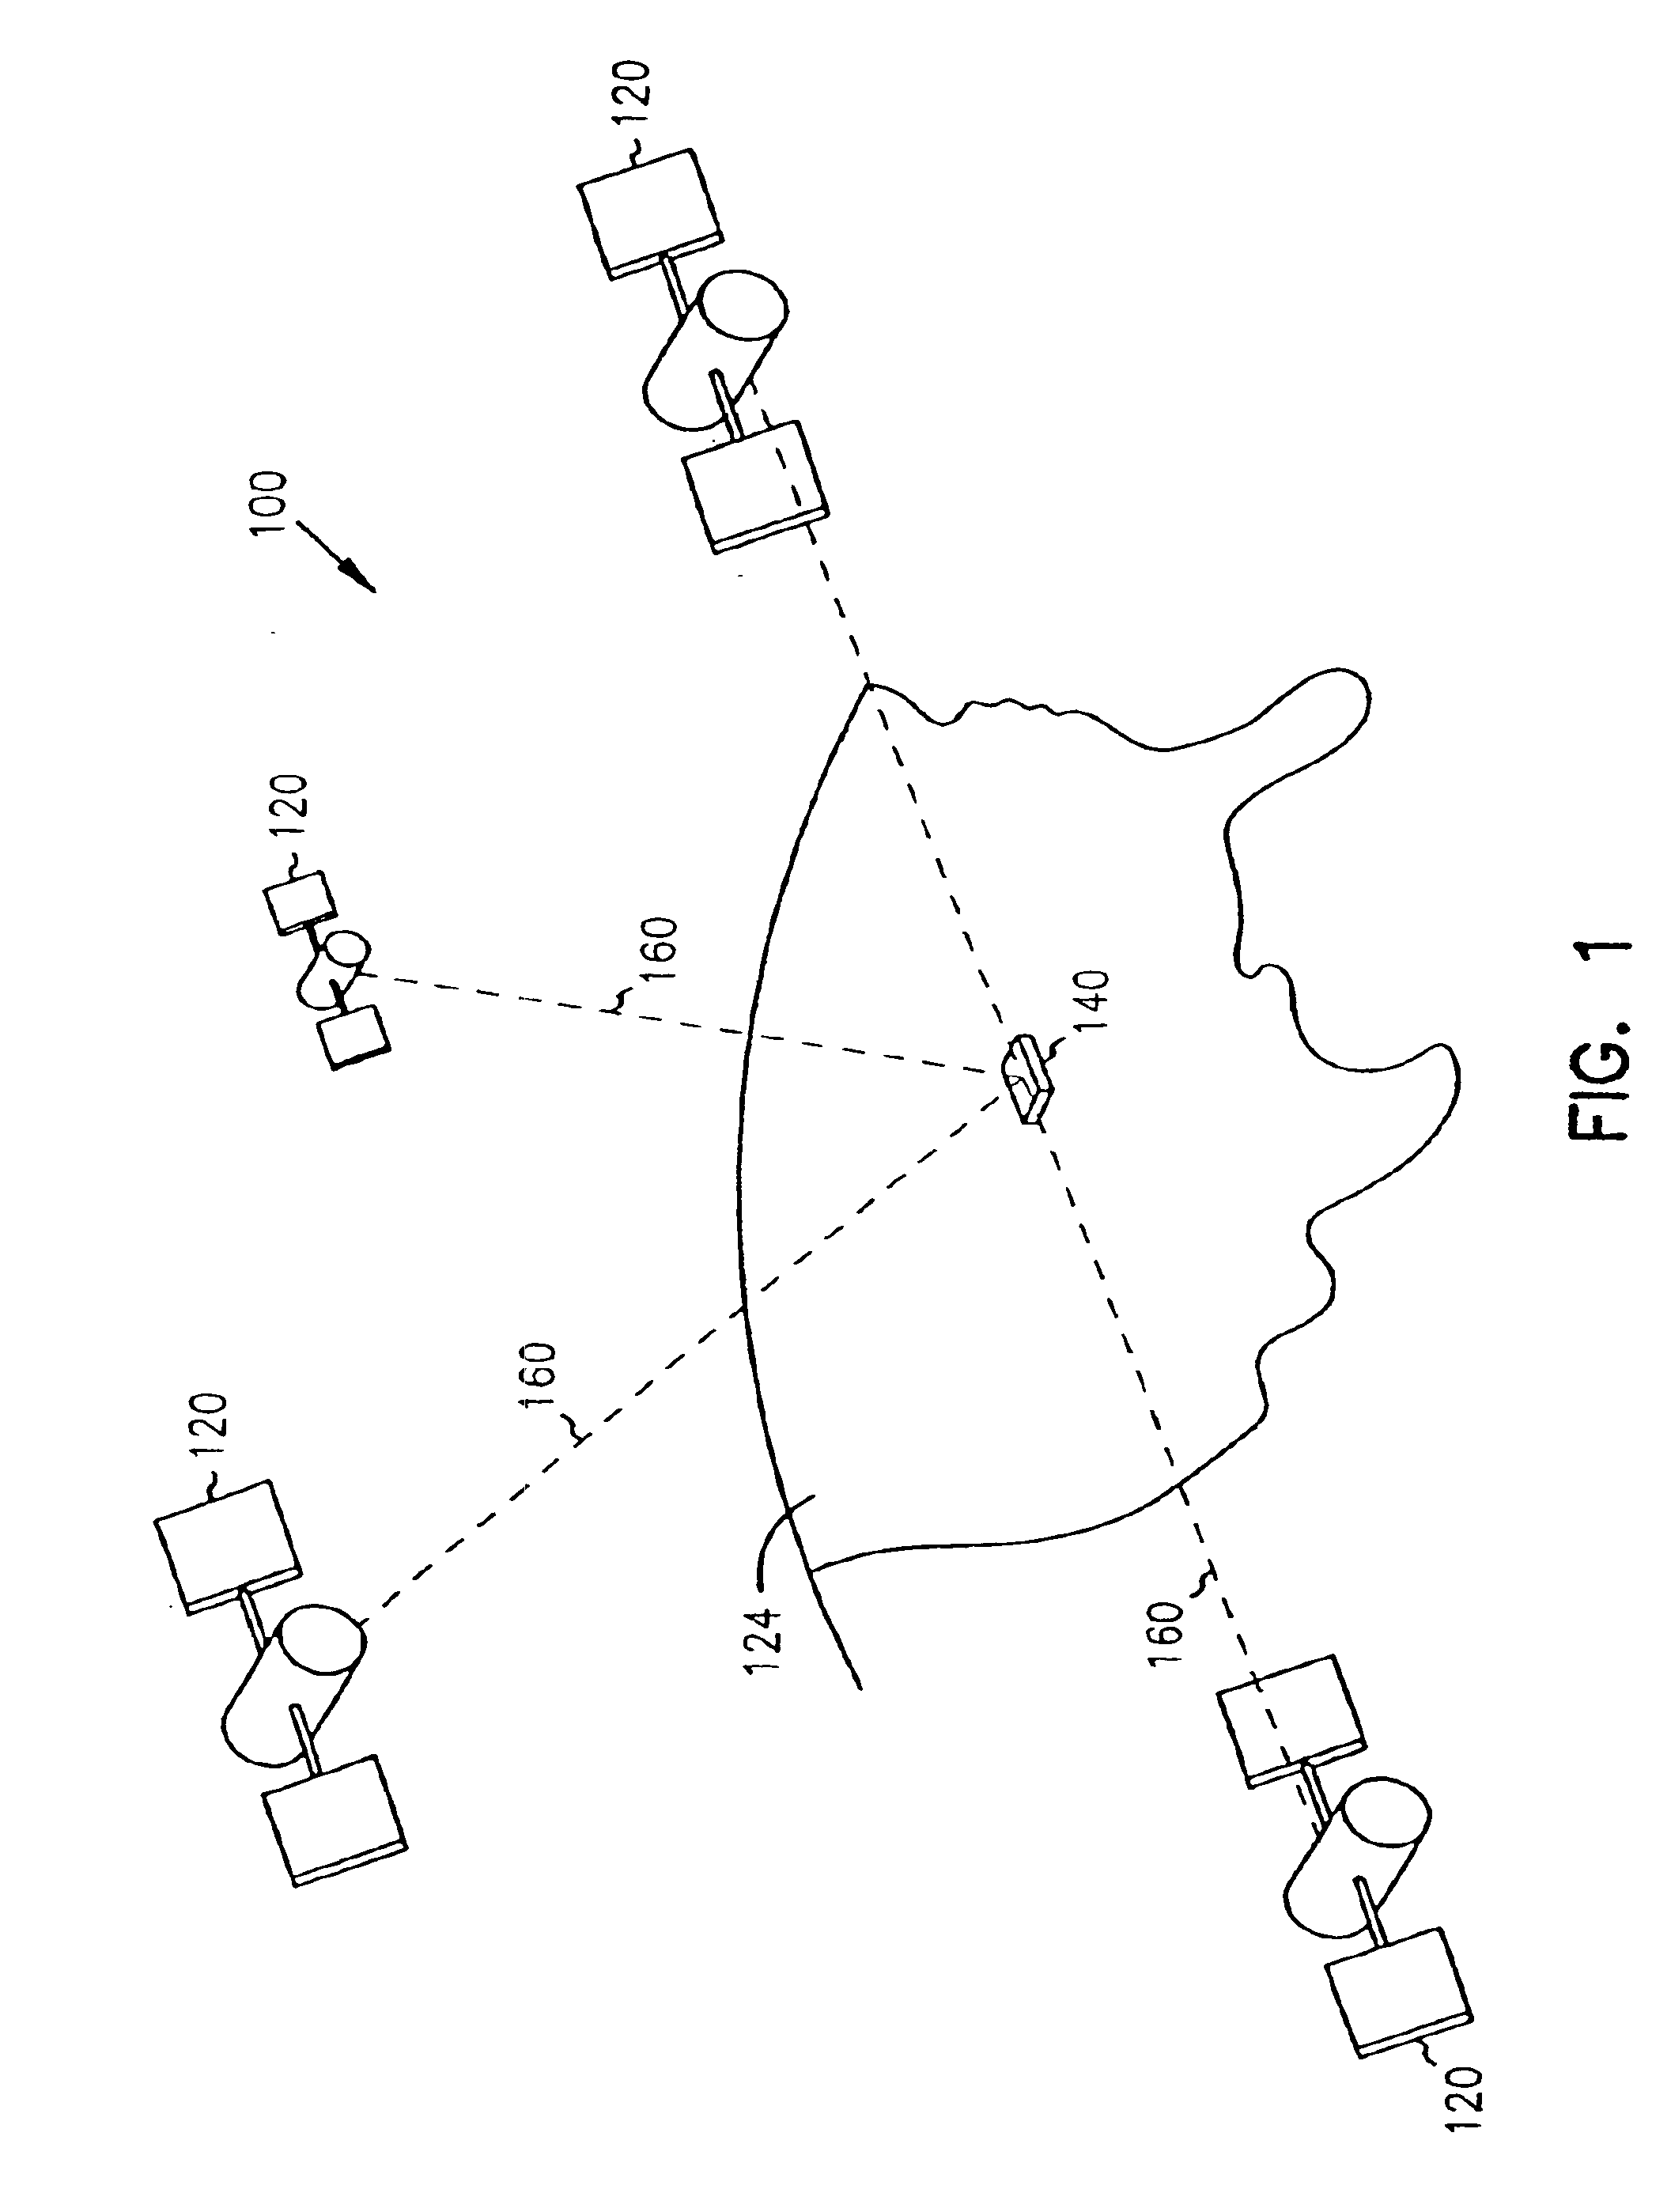 Systems and methods for a navigational device with forced layer switching based on memory constraints